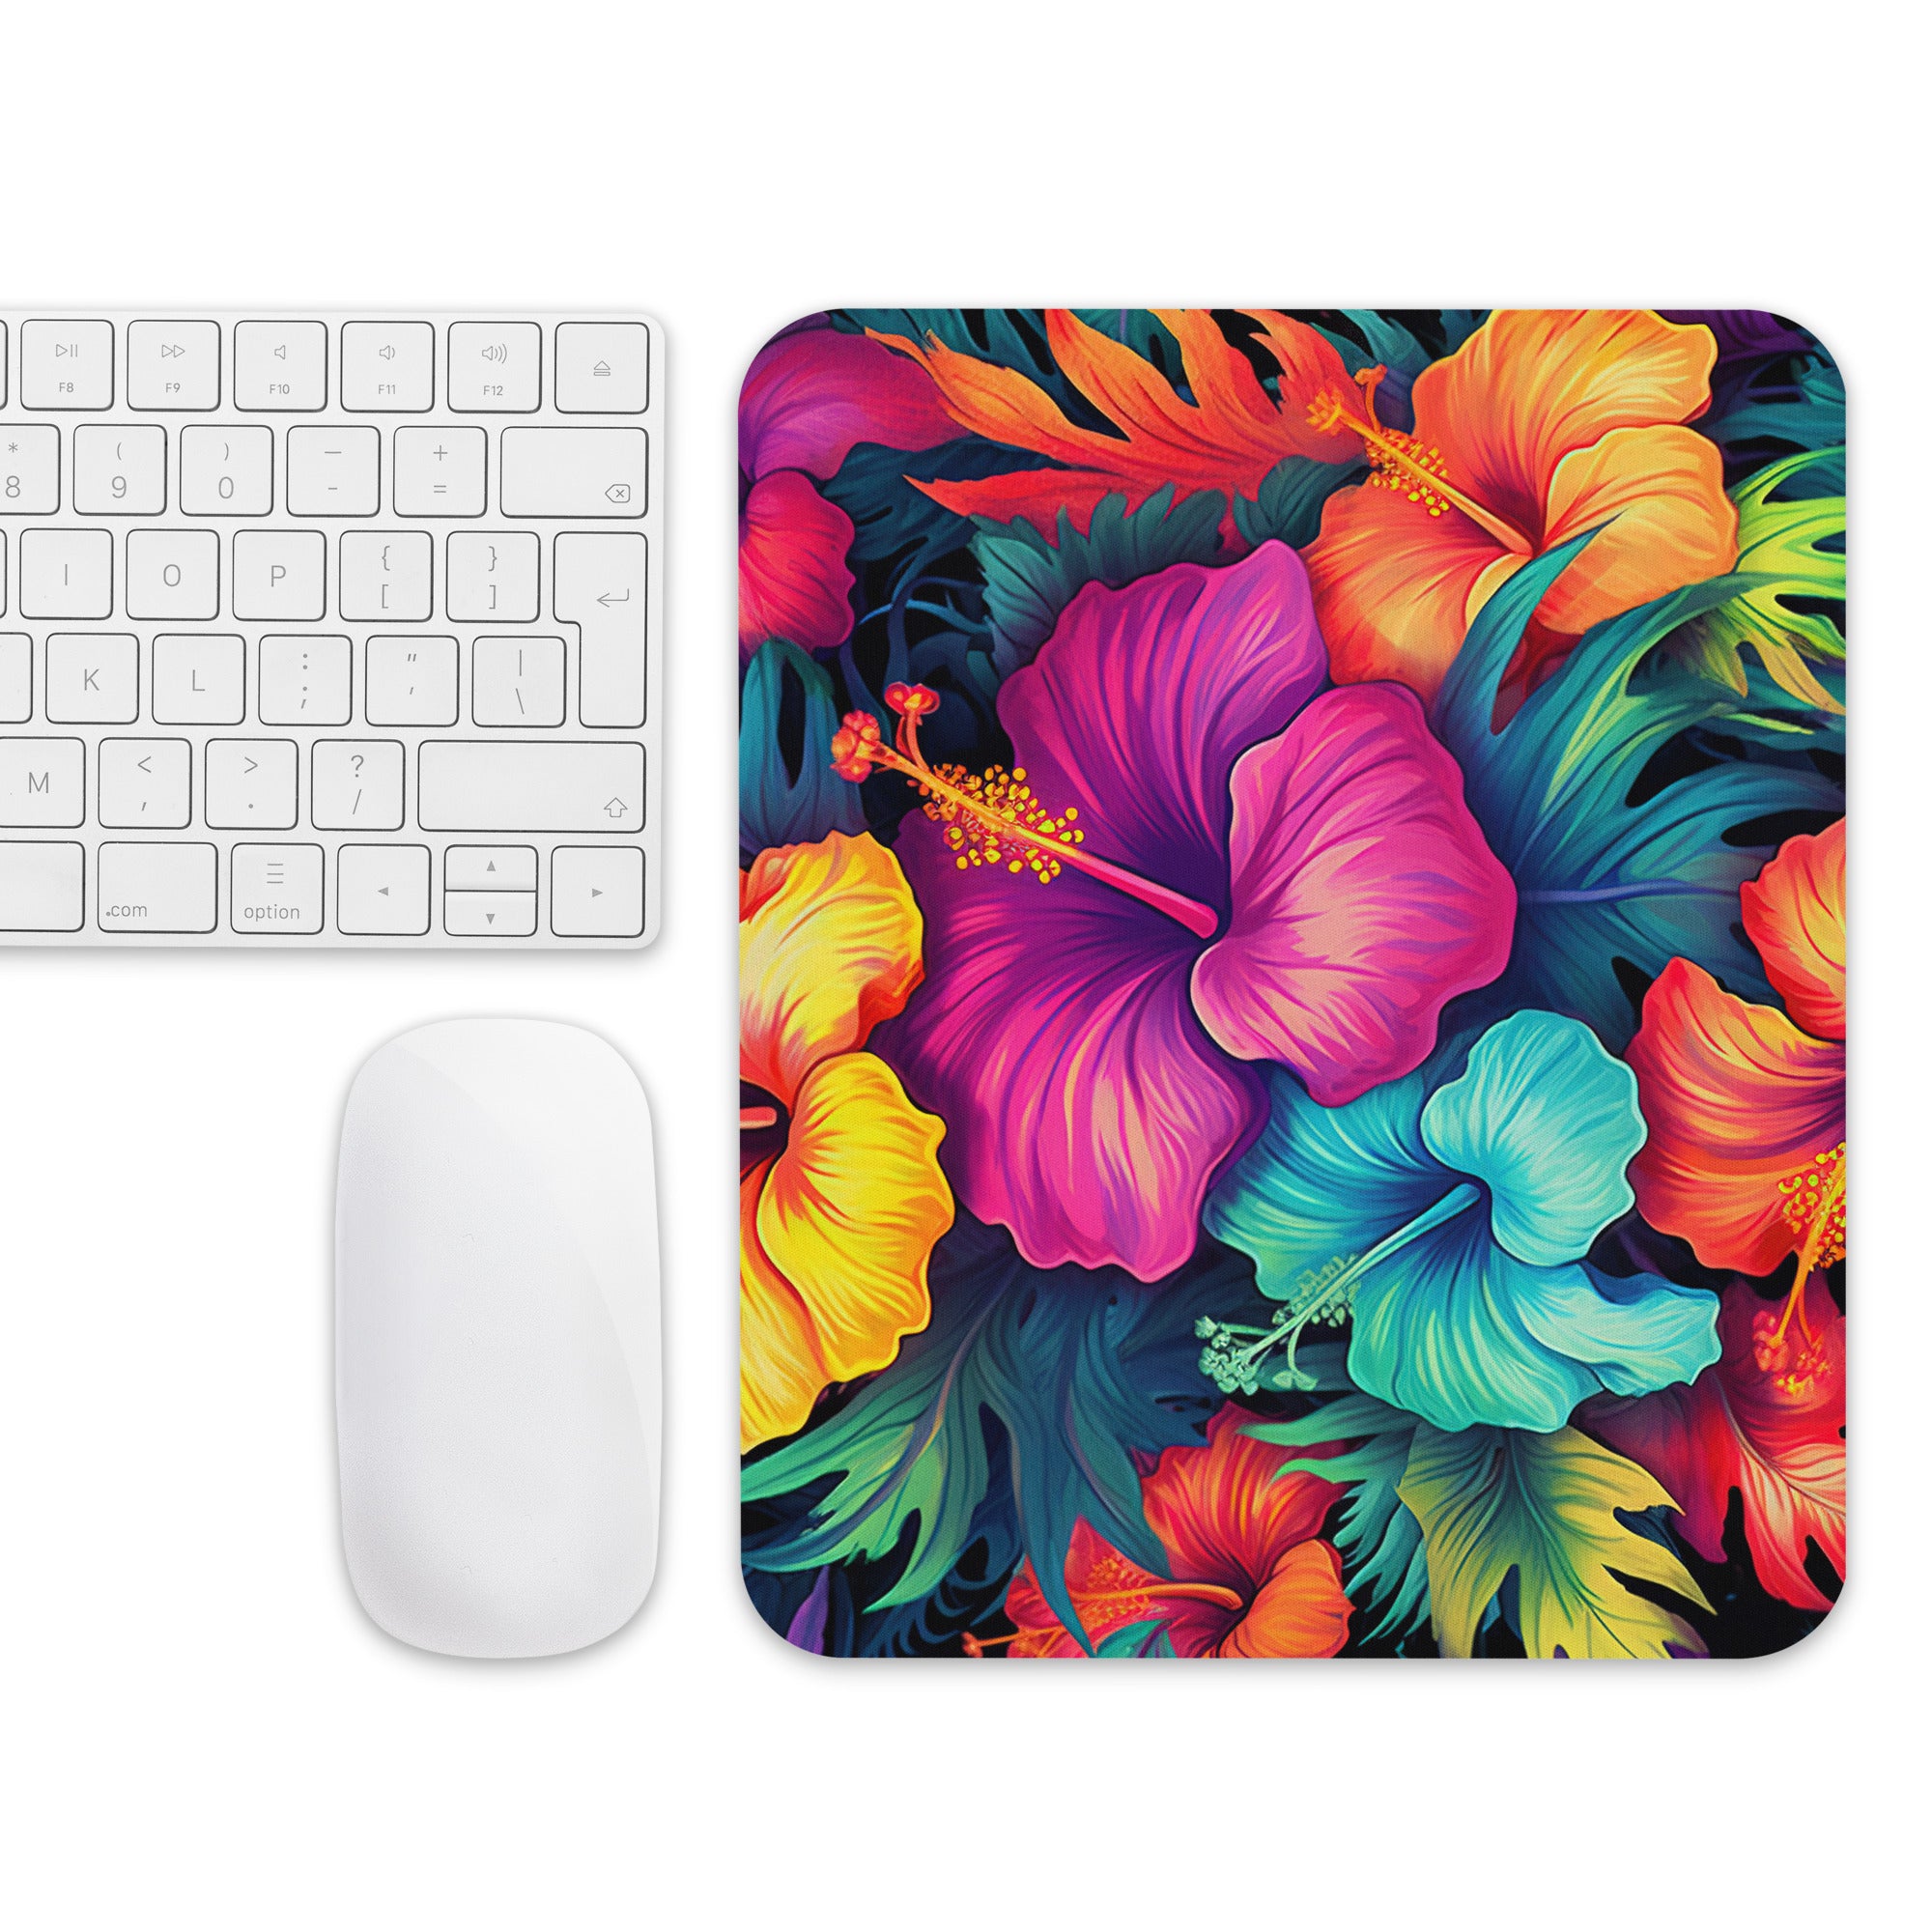 Mouse pad, Flower Pad, back to school